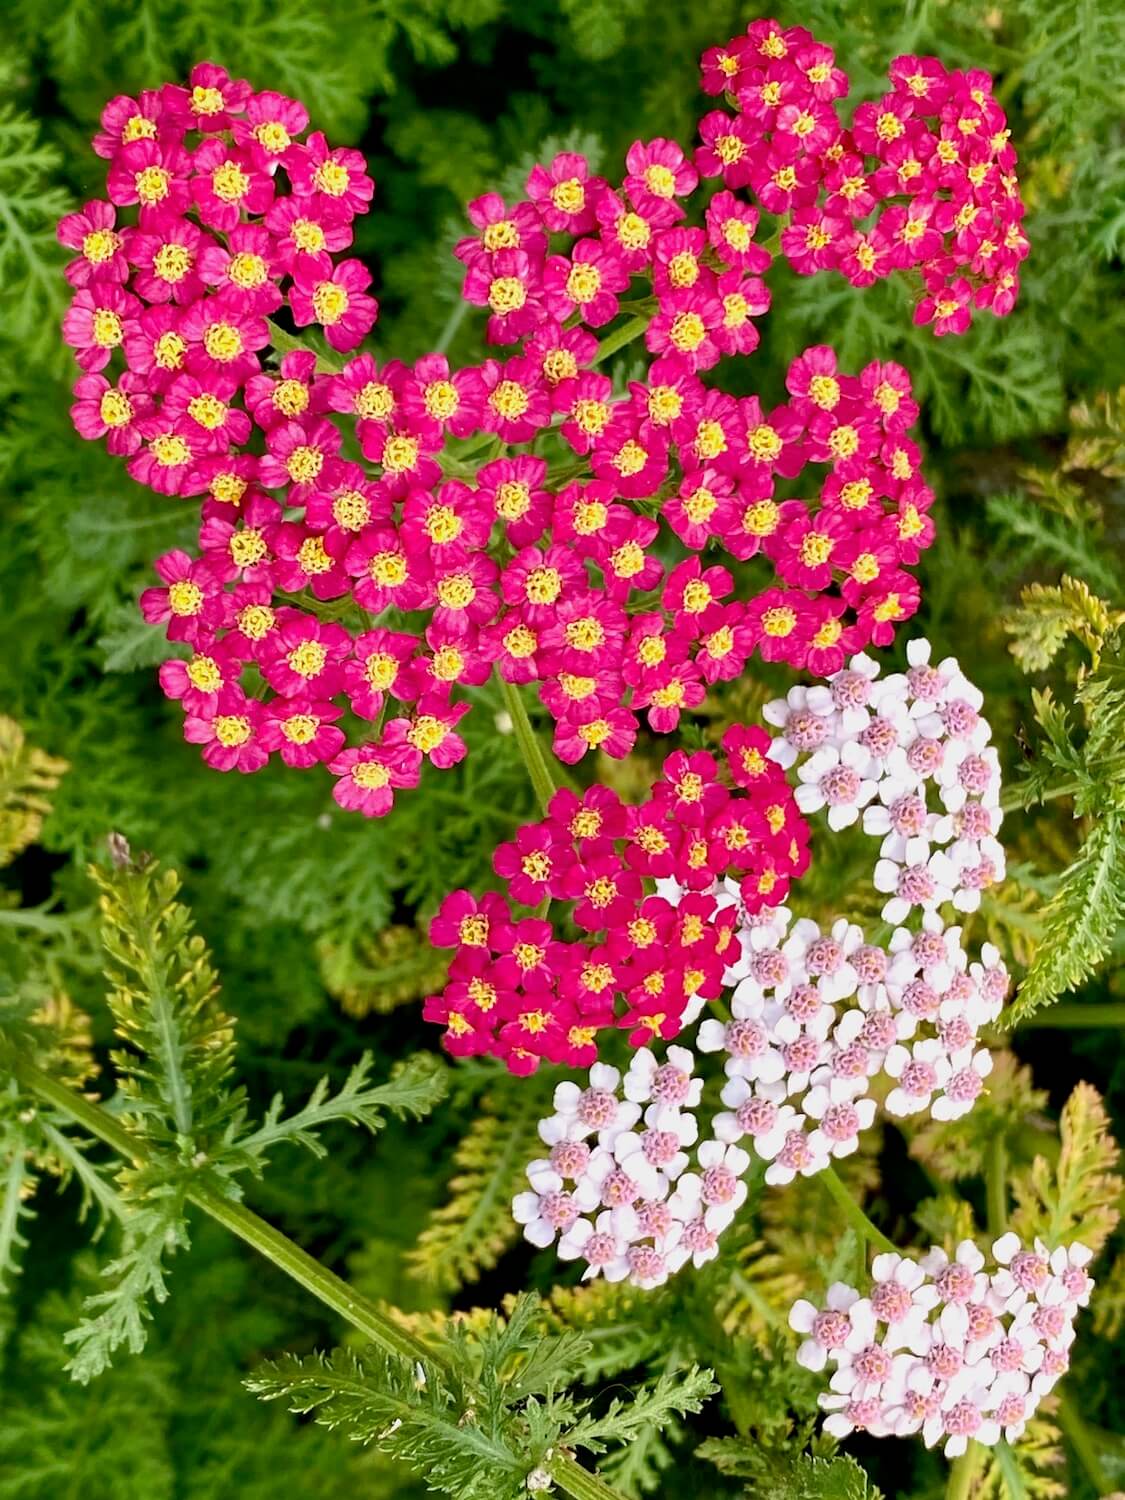 The tiny flowers of Yarrow plant gather in this cluster of bright pink while a separate cluster of light pink slings just to the side of the plant, which is surrounded by green leafs.